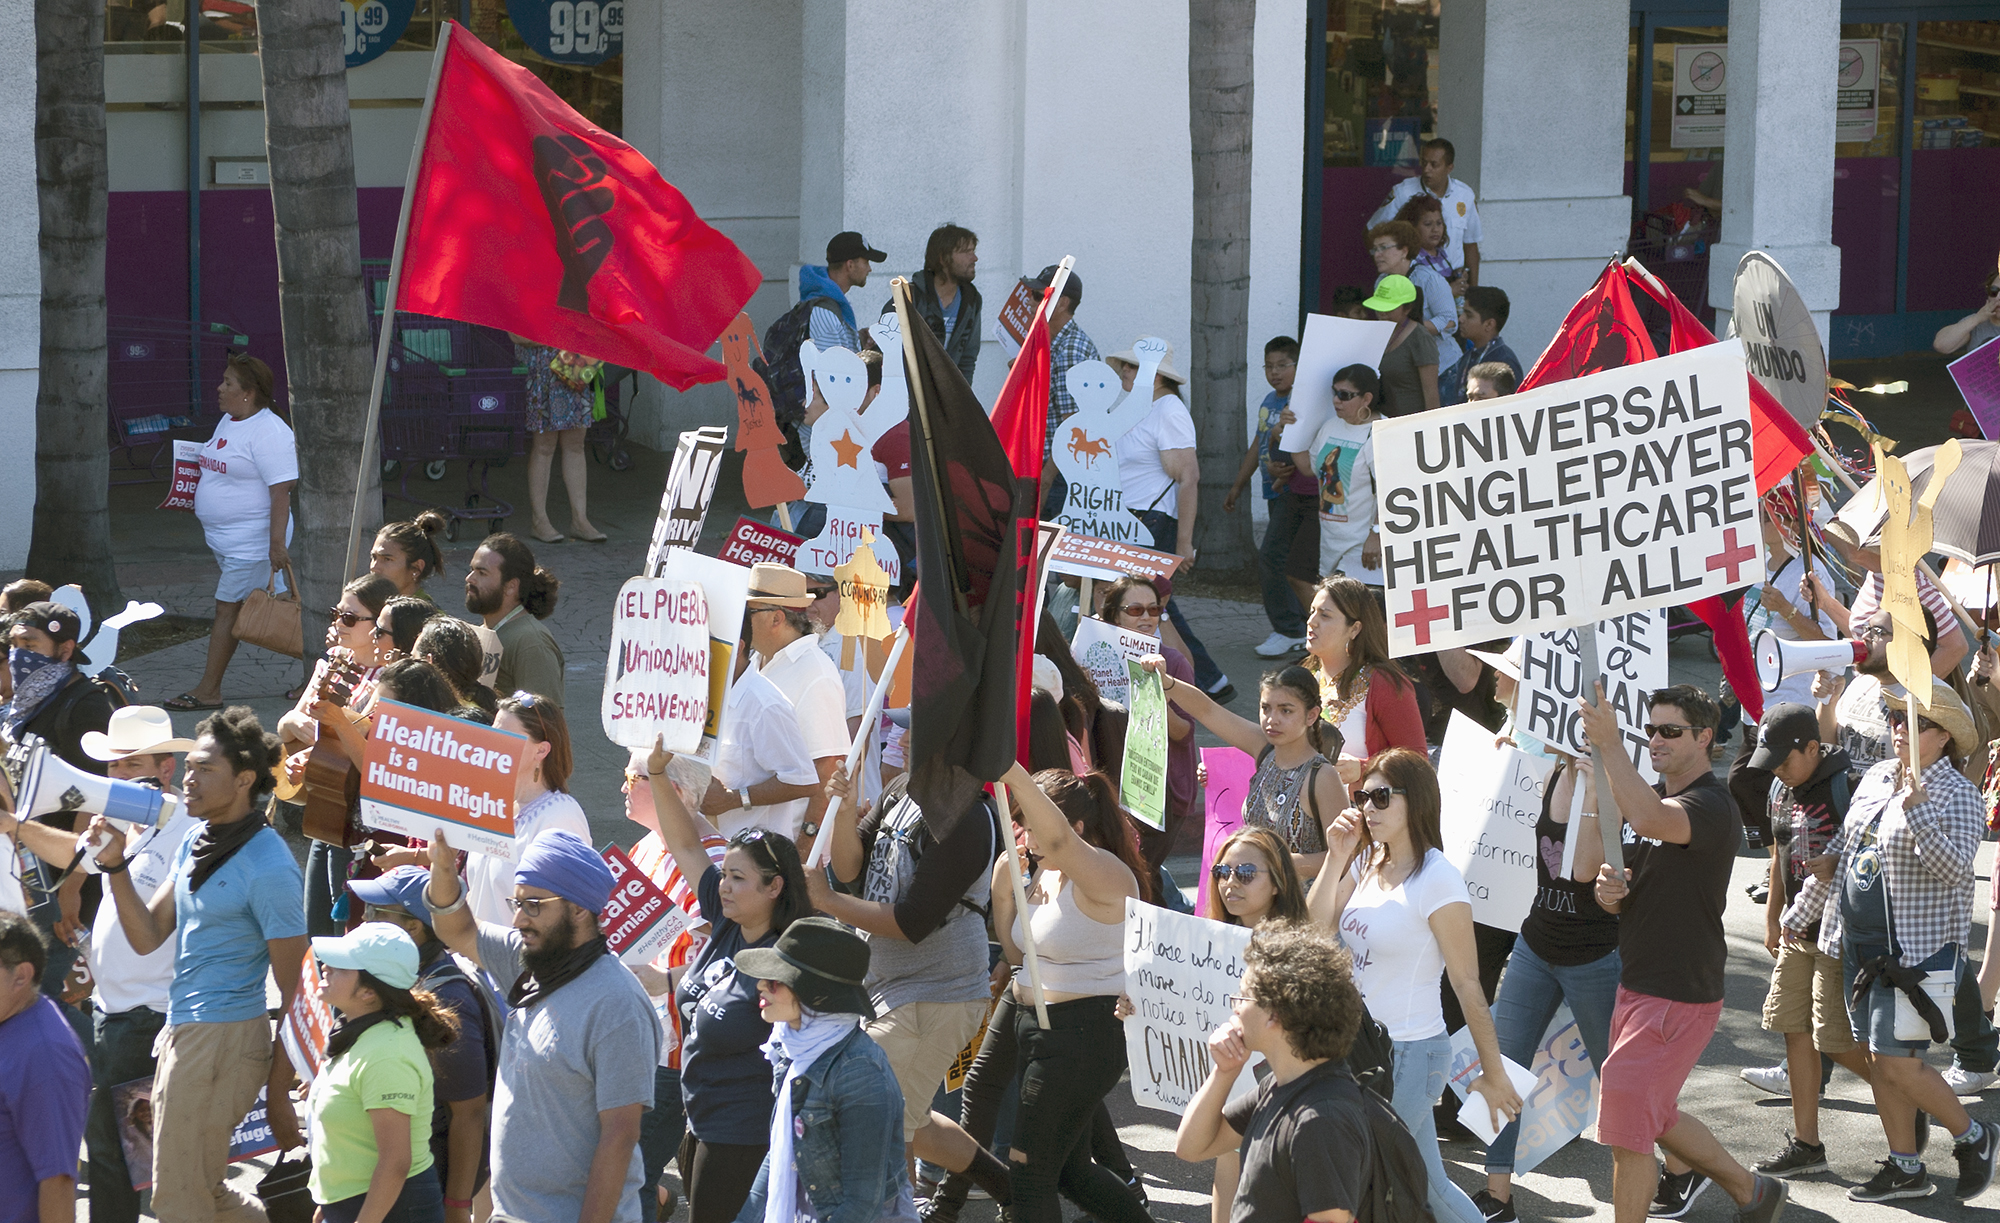 More than 200 people marched down Main Street in Santa Ana on May 1st.